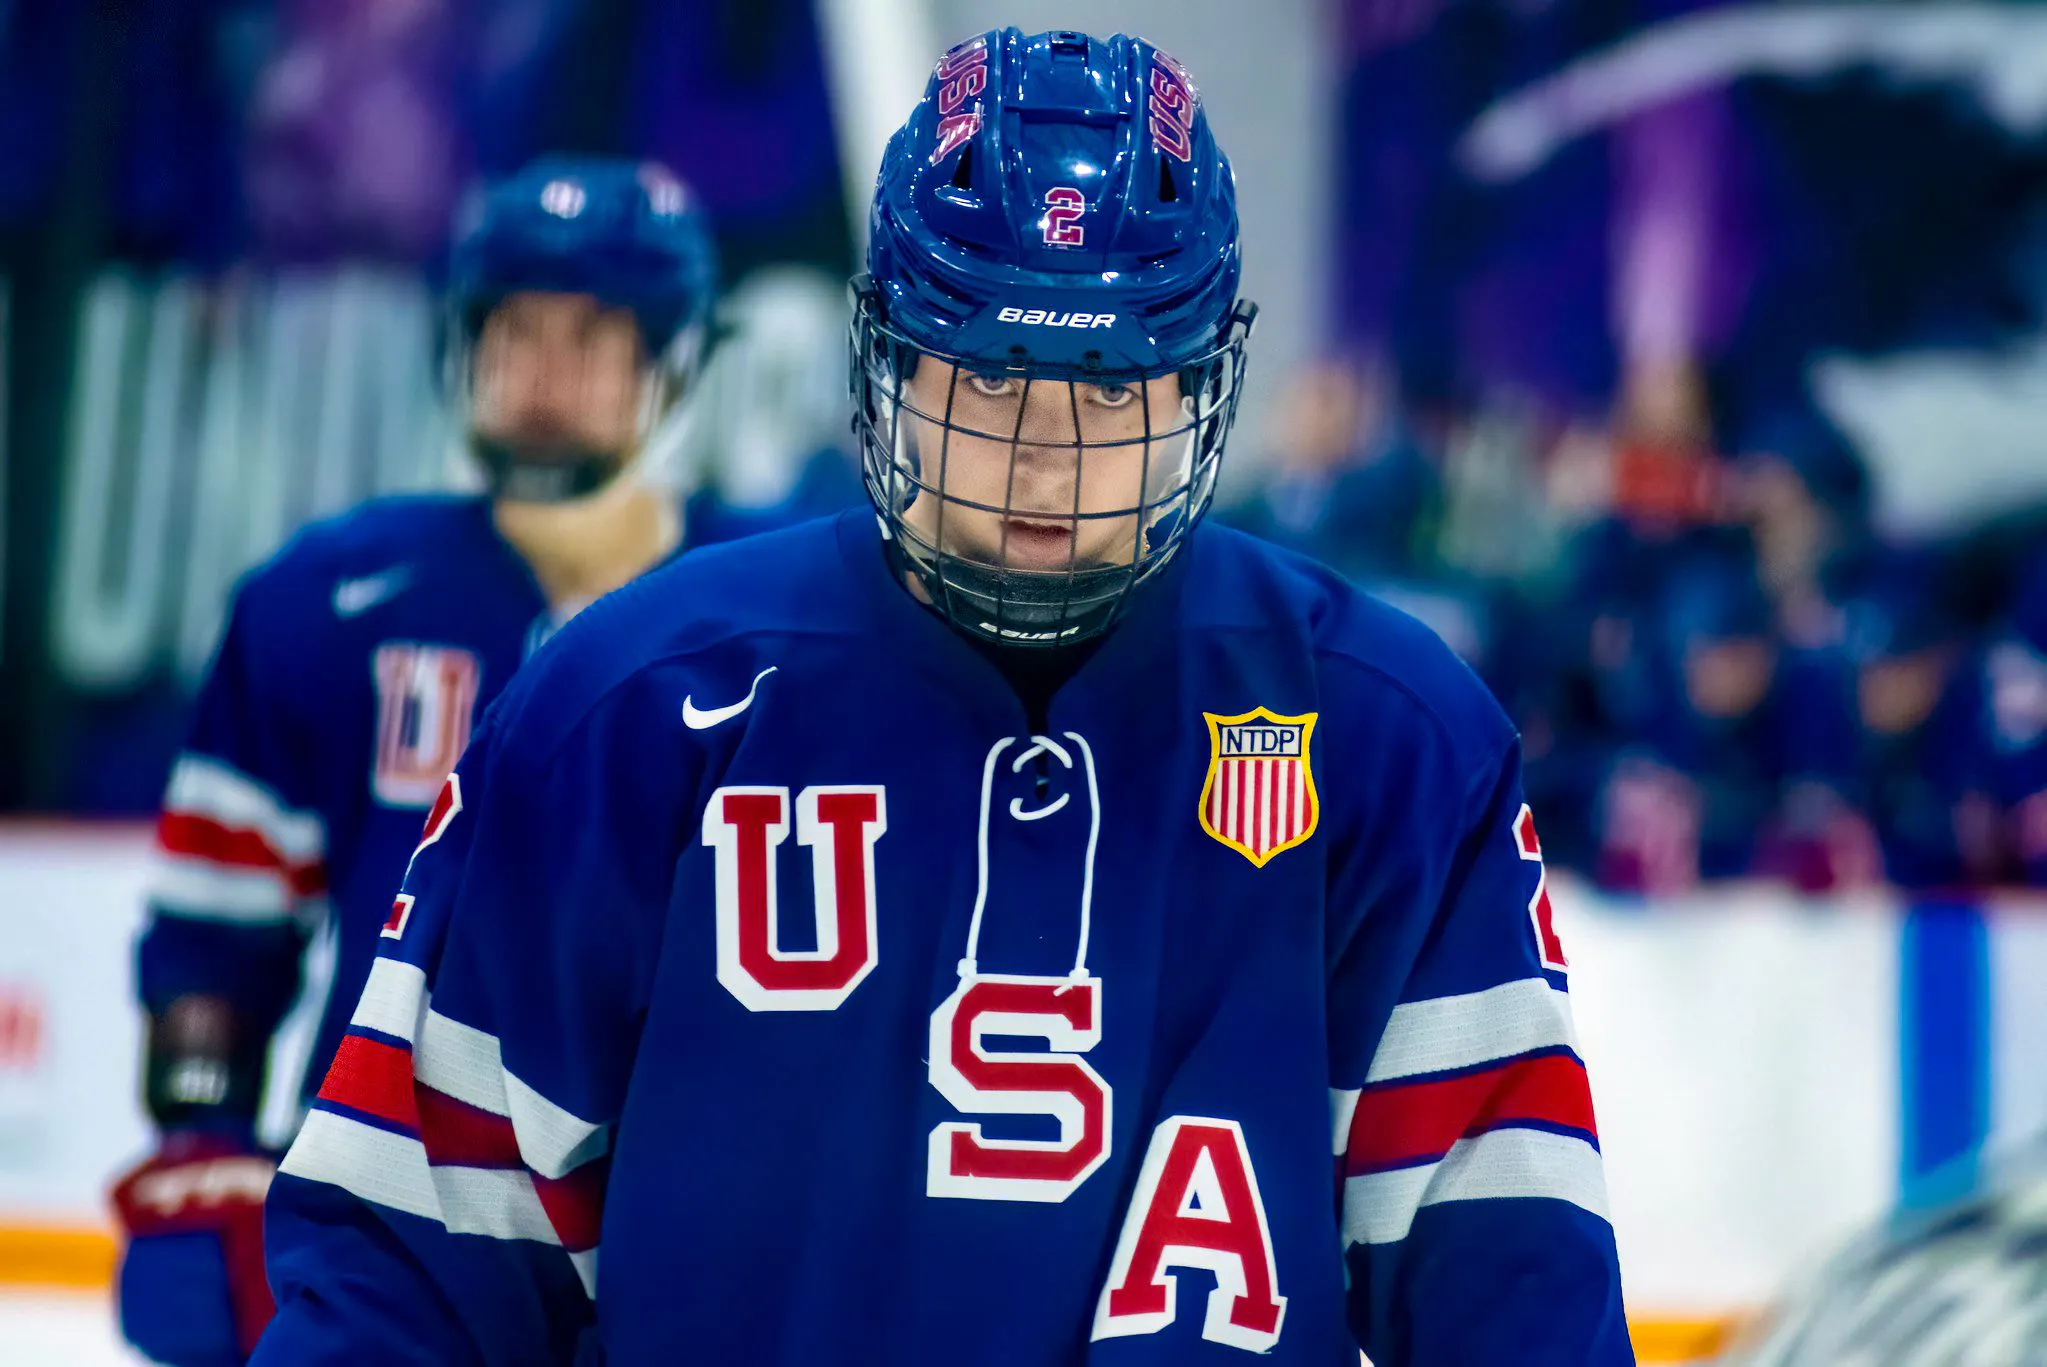 2023 NHL Draft prospect Will Smith has everything teams want